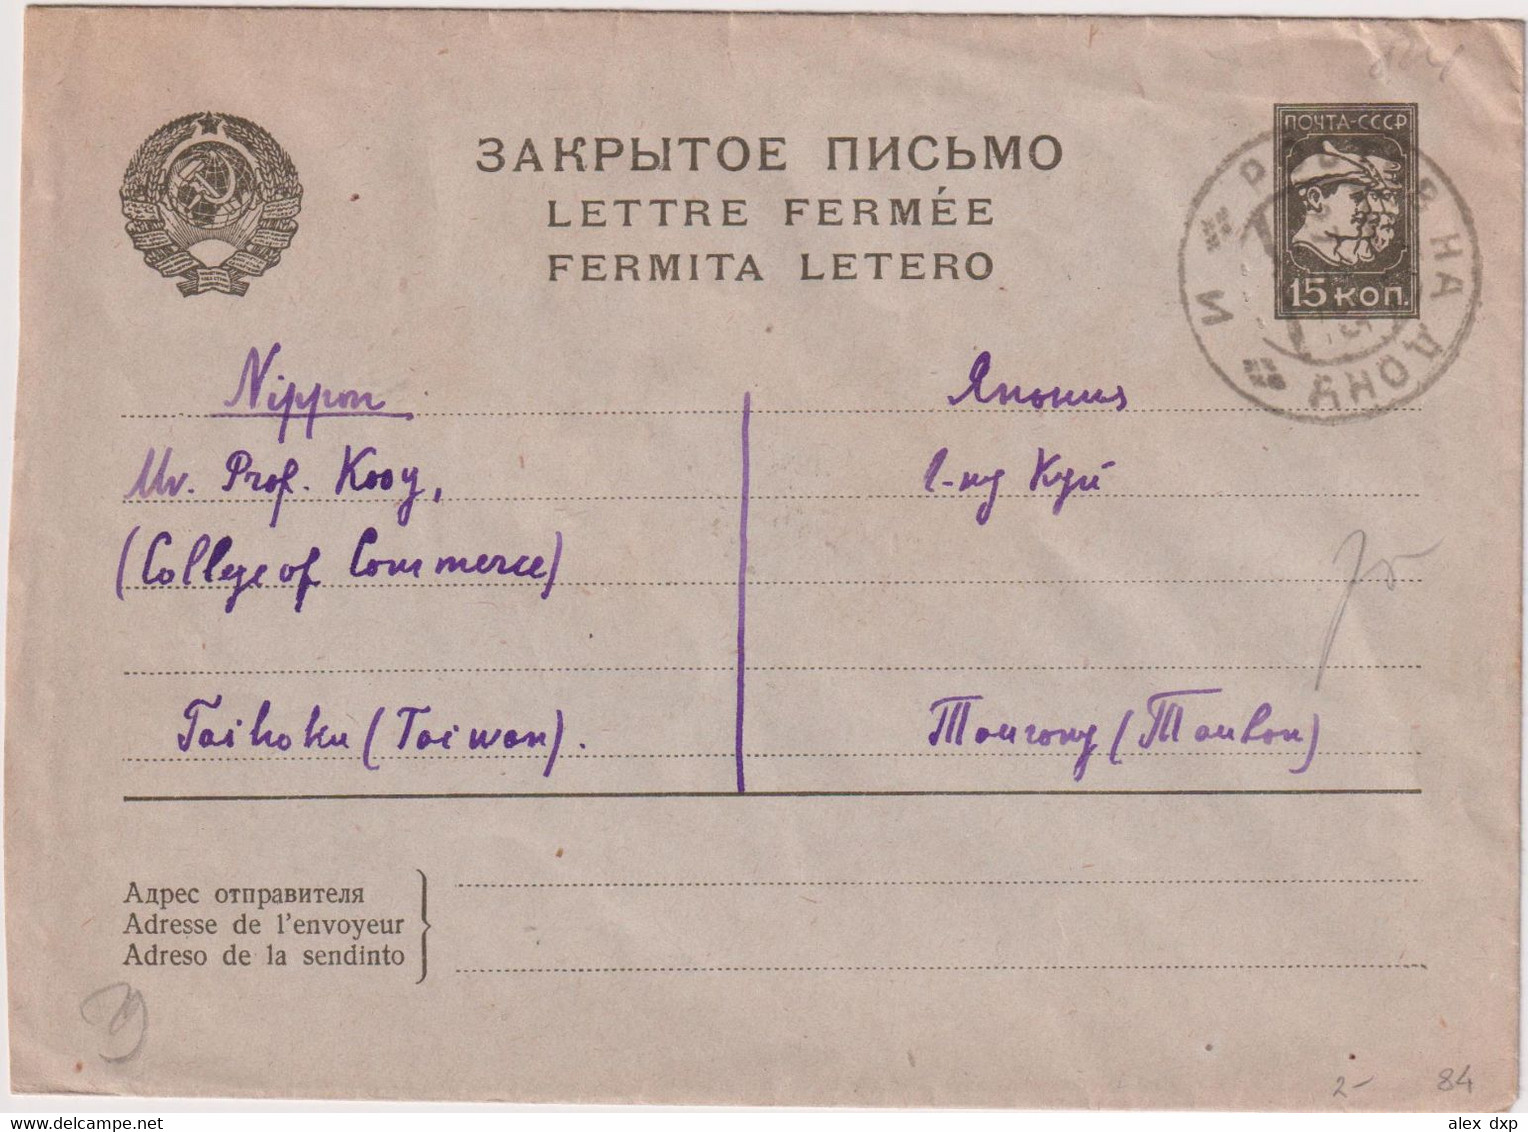 RUSSIA (USSR) > 1935 POSTAL HISTORY > CLOSED LETTER STATIONARY COVER TO TAIWAN (PERIOD OF JAPANESE OCCUPATION) - Briefe U. Dokumente